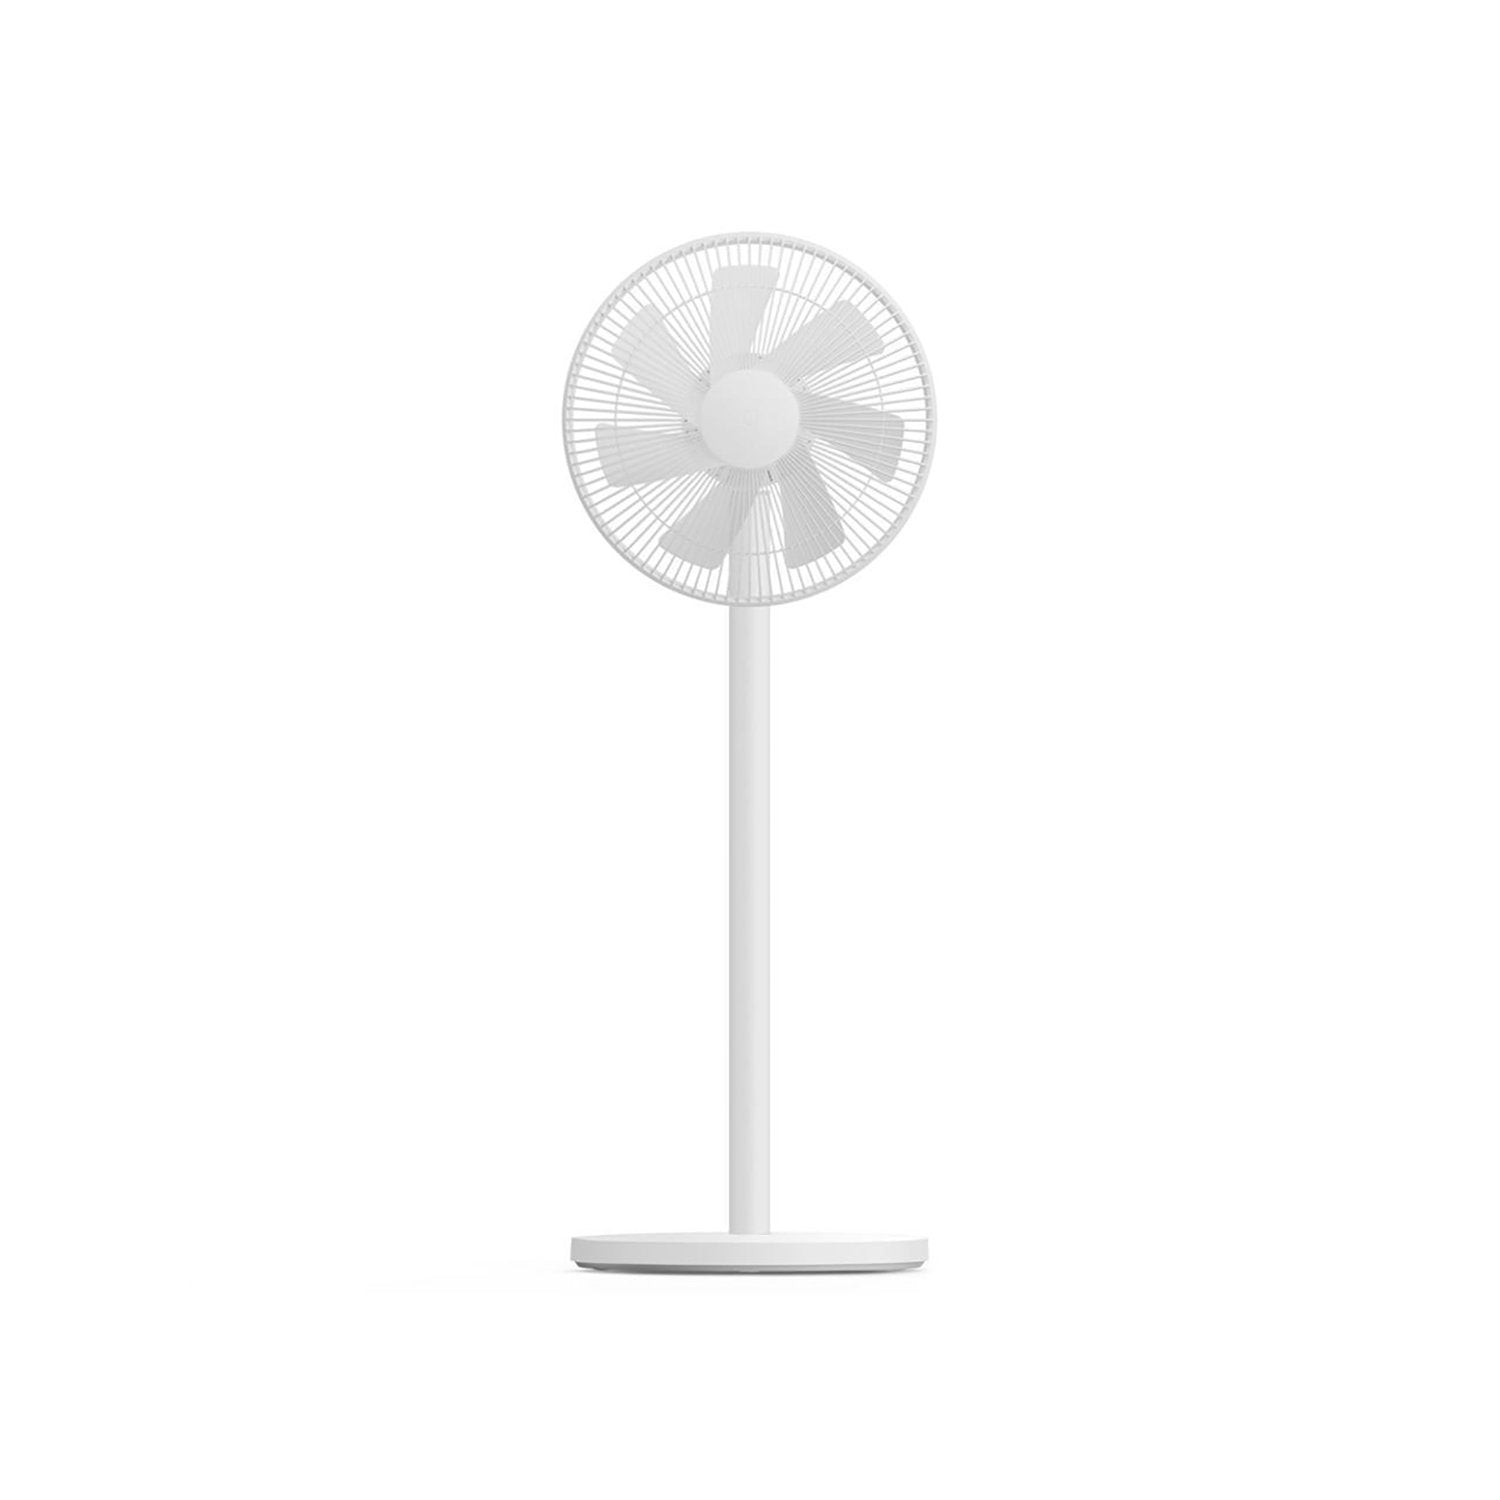 Xiaomi Mijia 1X Wired Portable Home Cooler House Standing Fan Natural Wind With WiFi APP Control, White Default Xiaomi Default 